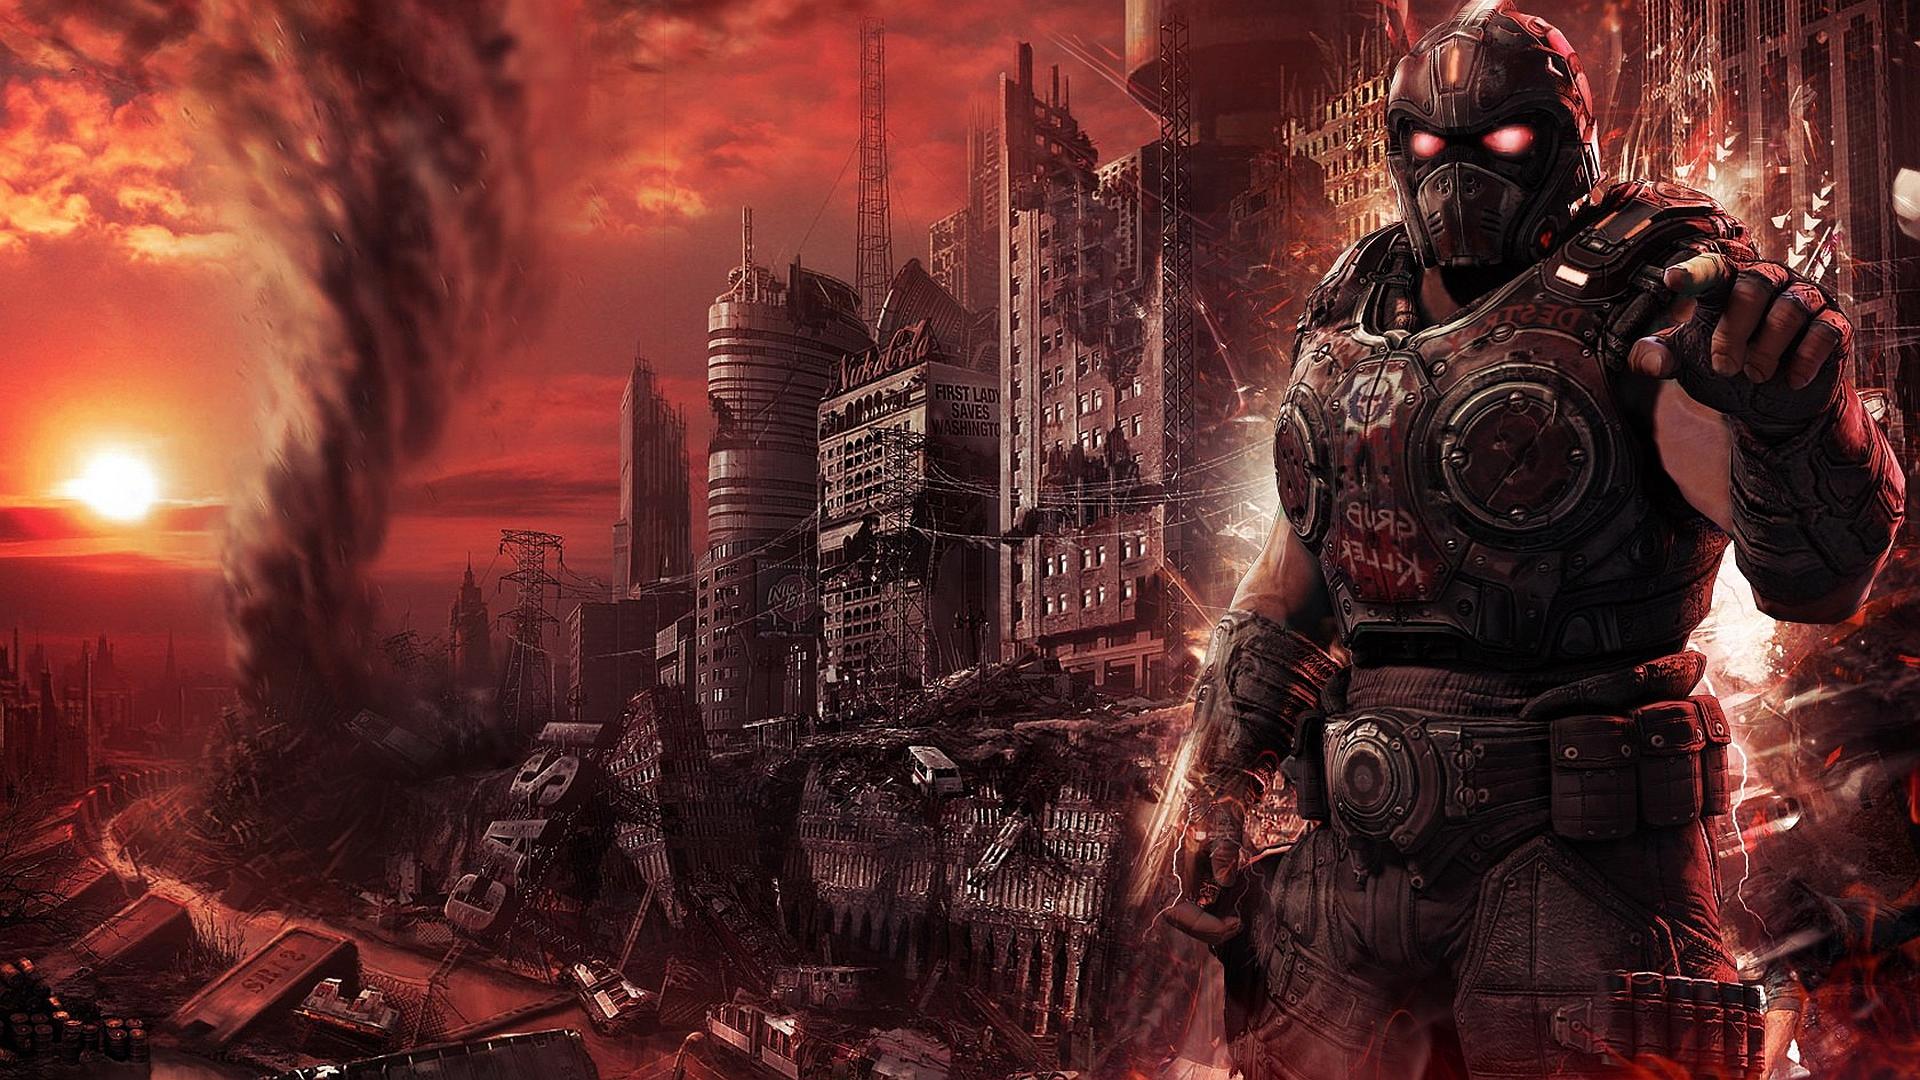 1920 x 1080 · jpeg - Fallout 4 Wallpapers, Pictures, Images